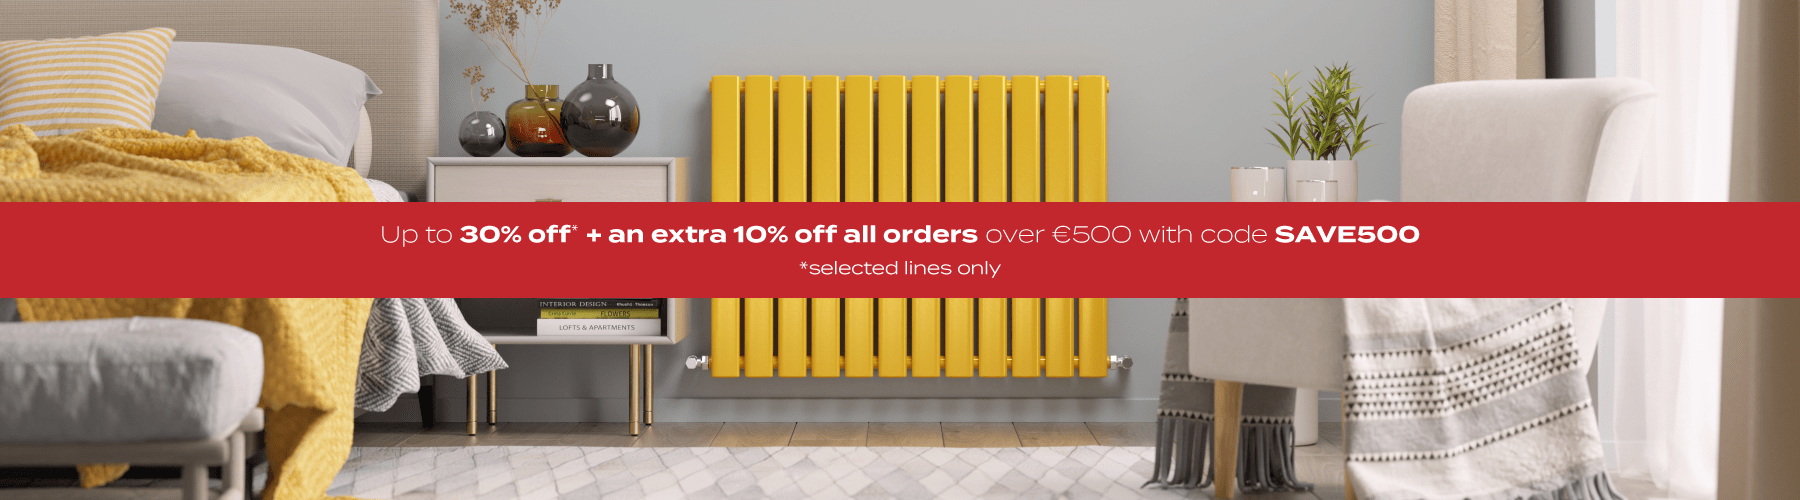  up to 30% off* + an extra 10% off all orders over €500 with code SAVE500 *selected lines only 